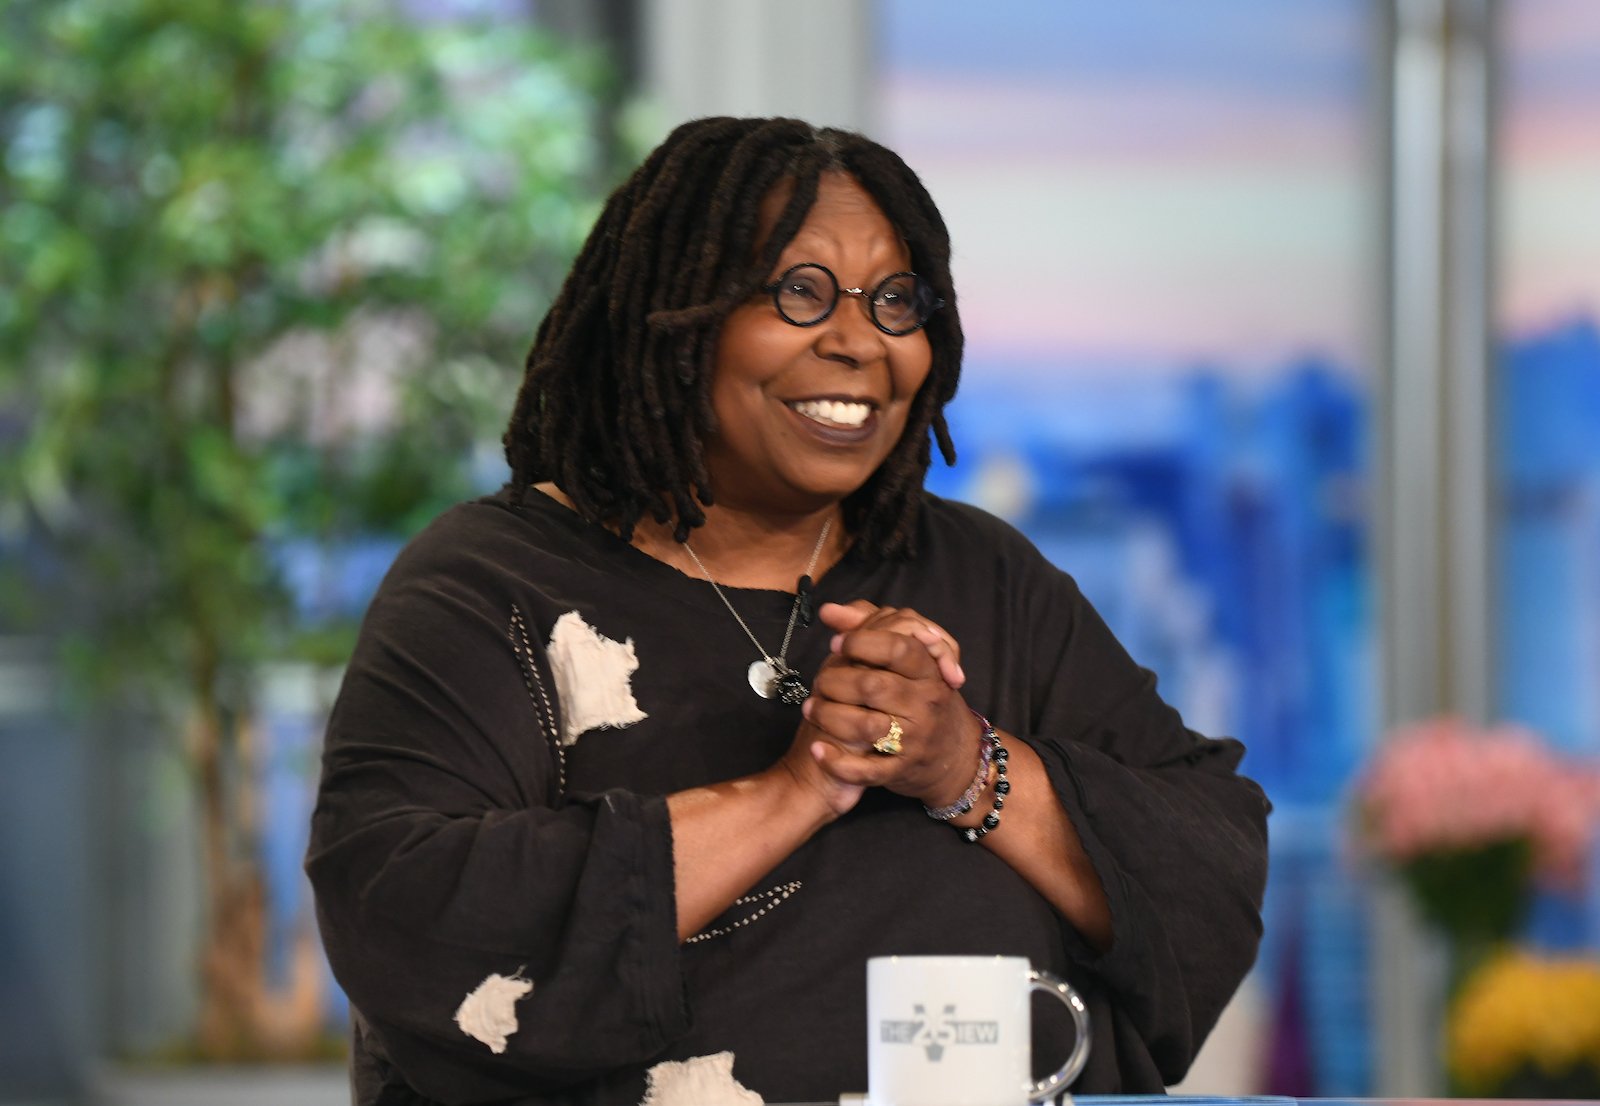 Whoopi Goldberg From ‘The View’ Is ‘Amazingly Talented’, Sally Jessy Raphael Says – but Shades Drew Barrymore and Kelly Clarkson